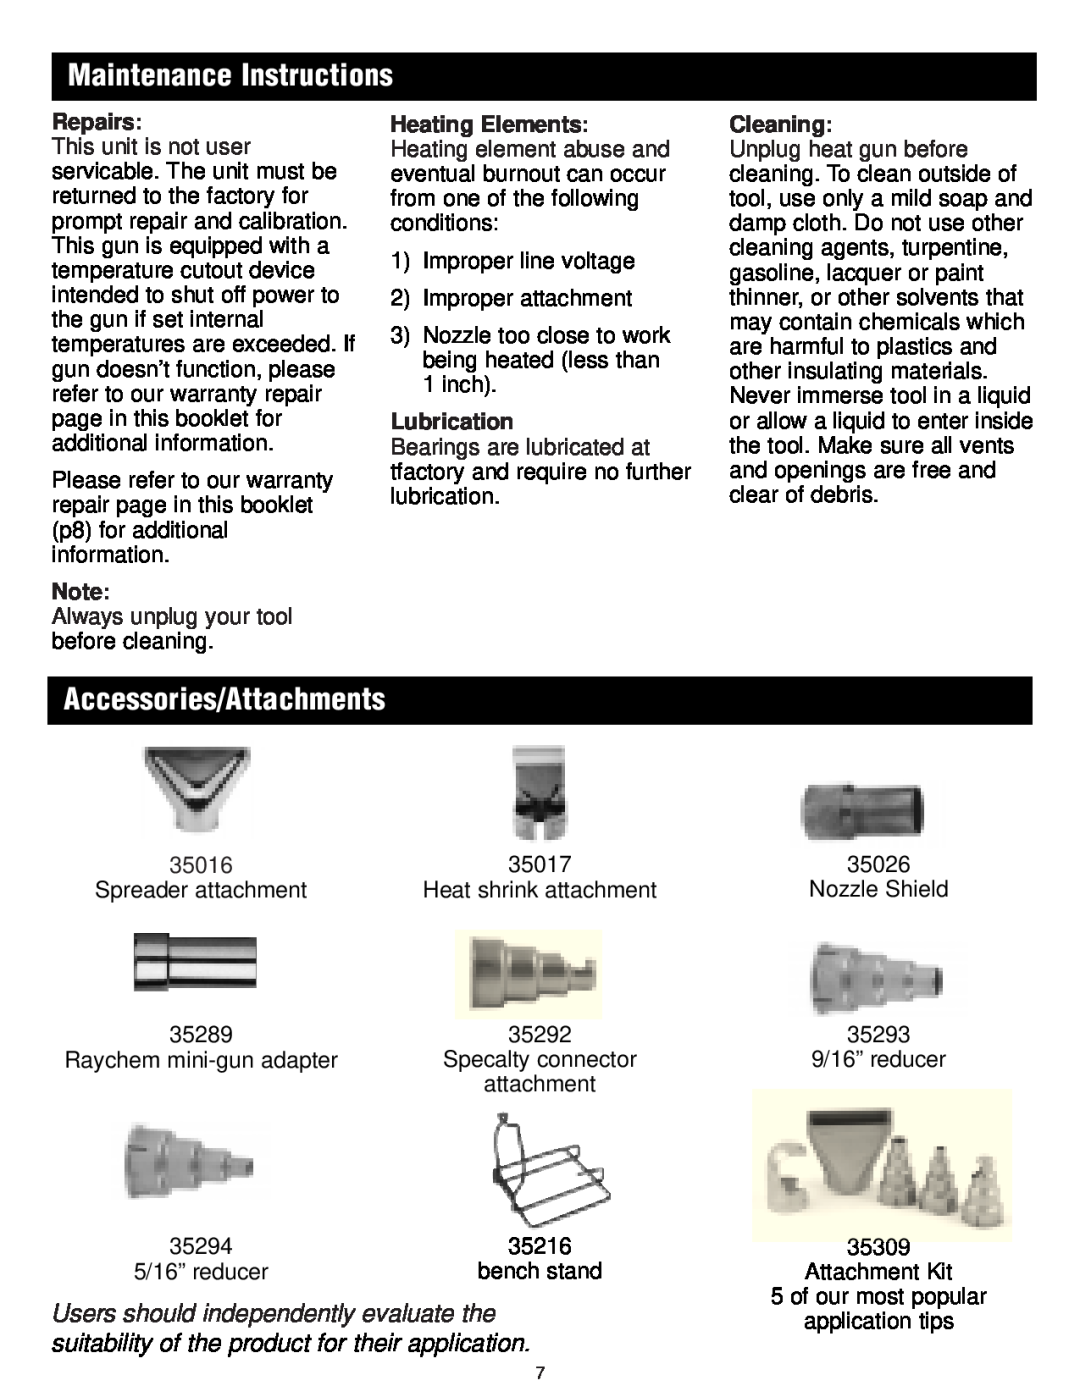 Master Appliance 1425-3550 FPM130-900F Maintenance Instructions, Accessories/Attachments, Repairs, Lubrication, Cleaning 